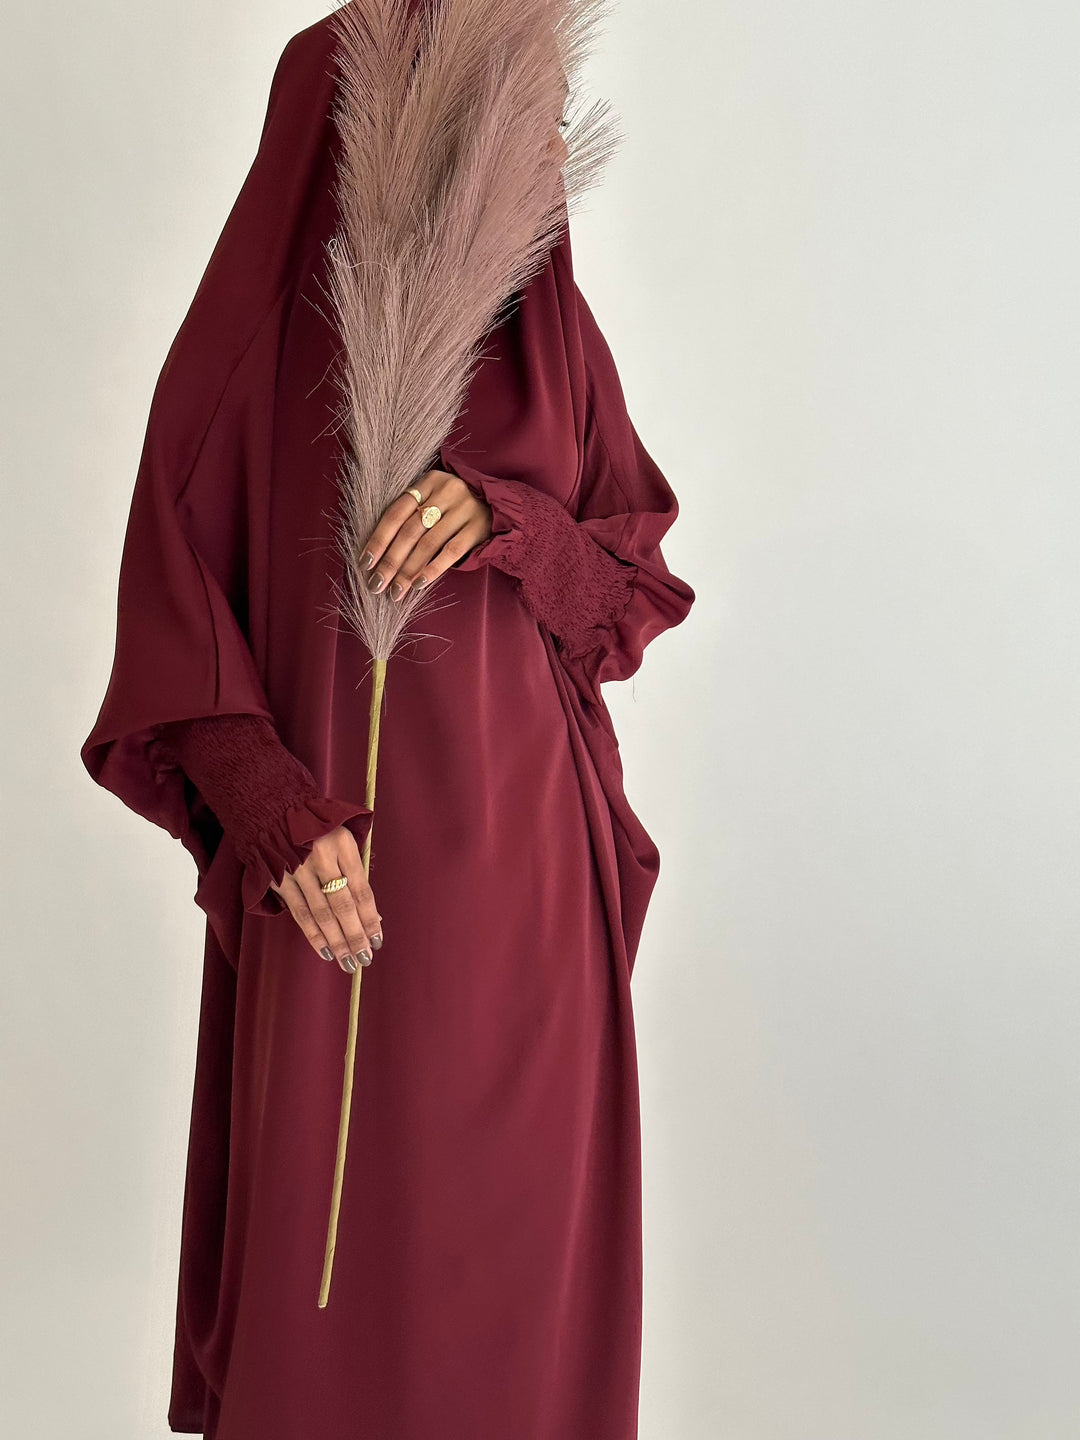 Get trendy with Medina 2-piece Jilbab - Wine -  available at Voilee NY. Grab yours for $34.90 today!